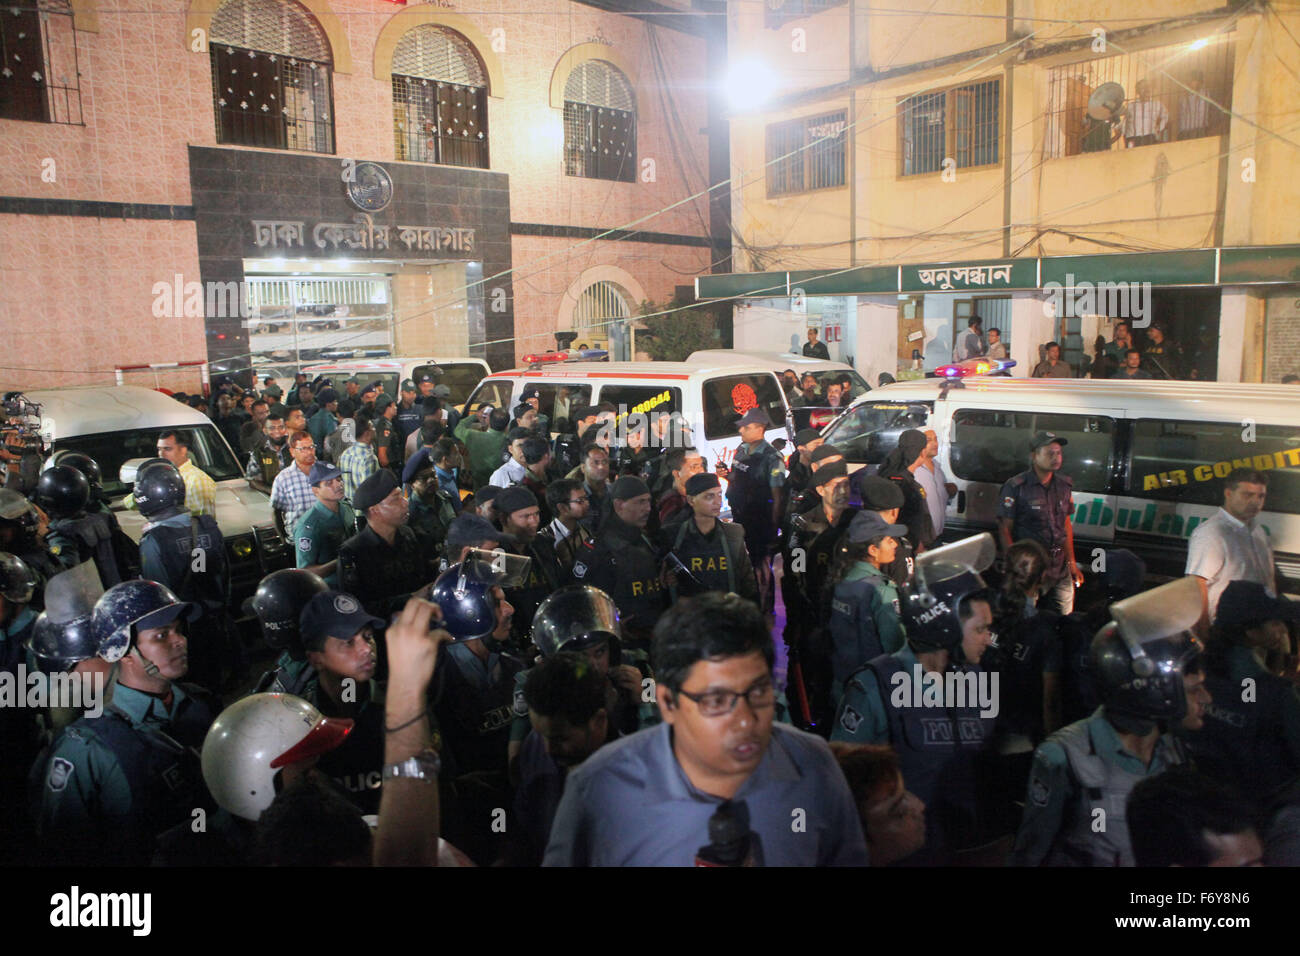 Dhaka, Bangladesh. 22nd November: A mbulances enter into Jail to carry dead body of  war criminals Salauddin Quader Chowdhury and Ali Ahsan Muhammad Mojaheed in Dhaka on November 22, 2015. Two war criminals, BNP leader Salauddin Quader Chowdhury and Jamaat-e-Islami secretary general Ali Ahsan Mohammad Mojaheed, have been executed at the same time for their crimes committed against humanity in 1971, says jail official. They were executed by hanging at 12:55am Sunday at Dhaka Central Jail, said Inspector General of Prison Syed Iftekhar Uddin. Both of them were handed down death penalty for their Stock Photo